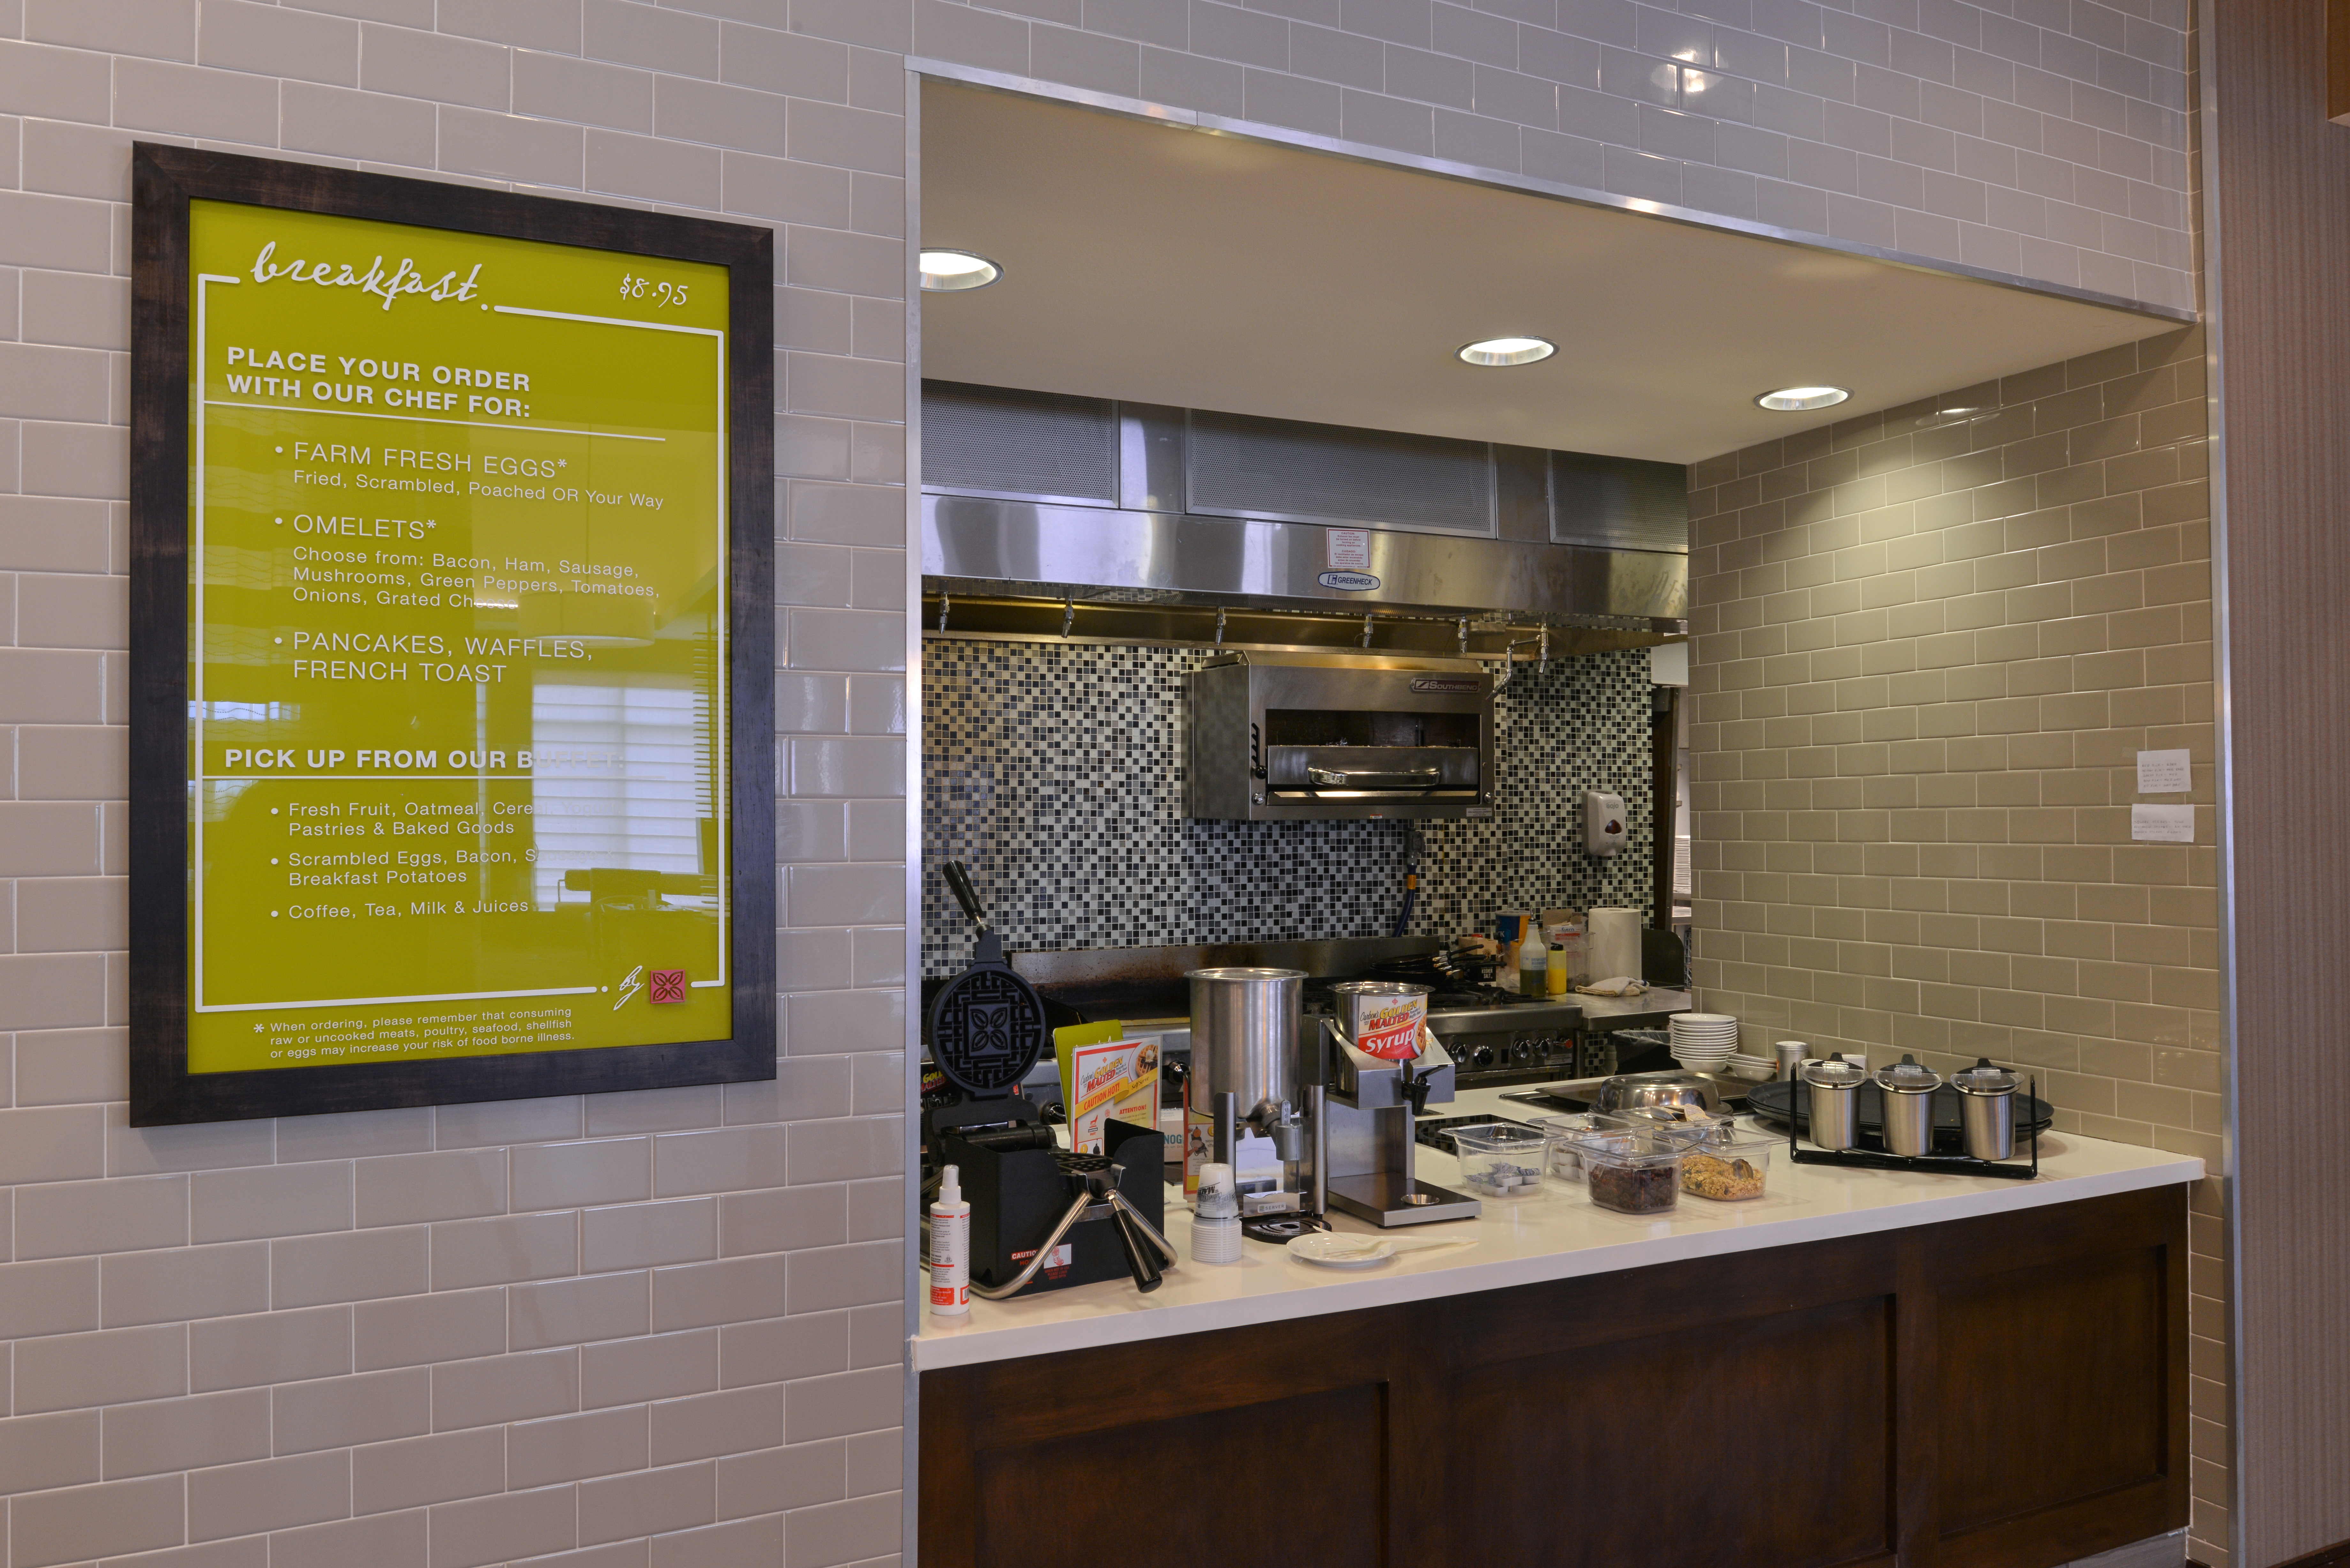 Buffet Selection in Breakfast Area with Menu Signage, Waffle Iron, and Condiments